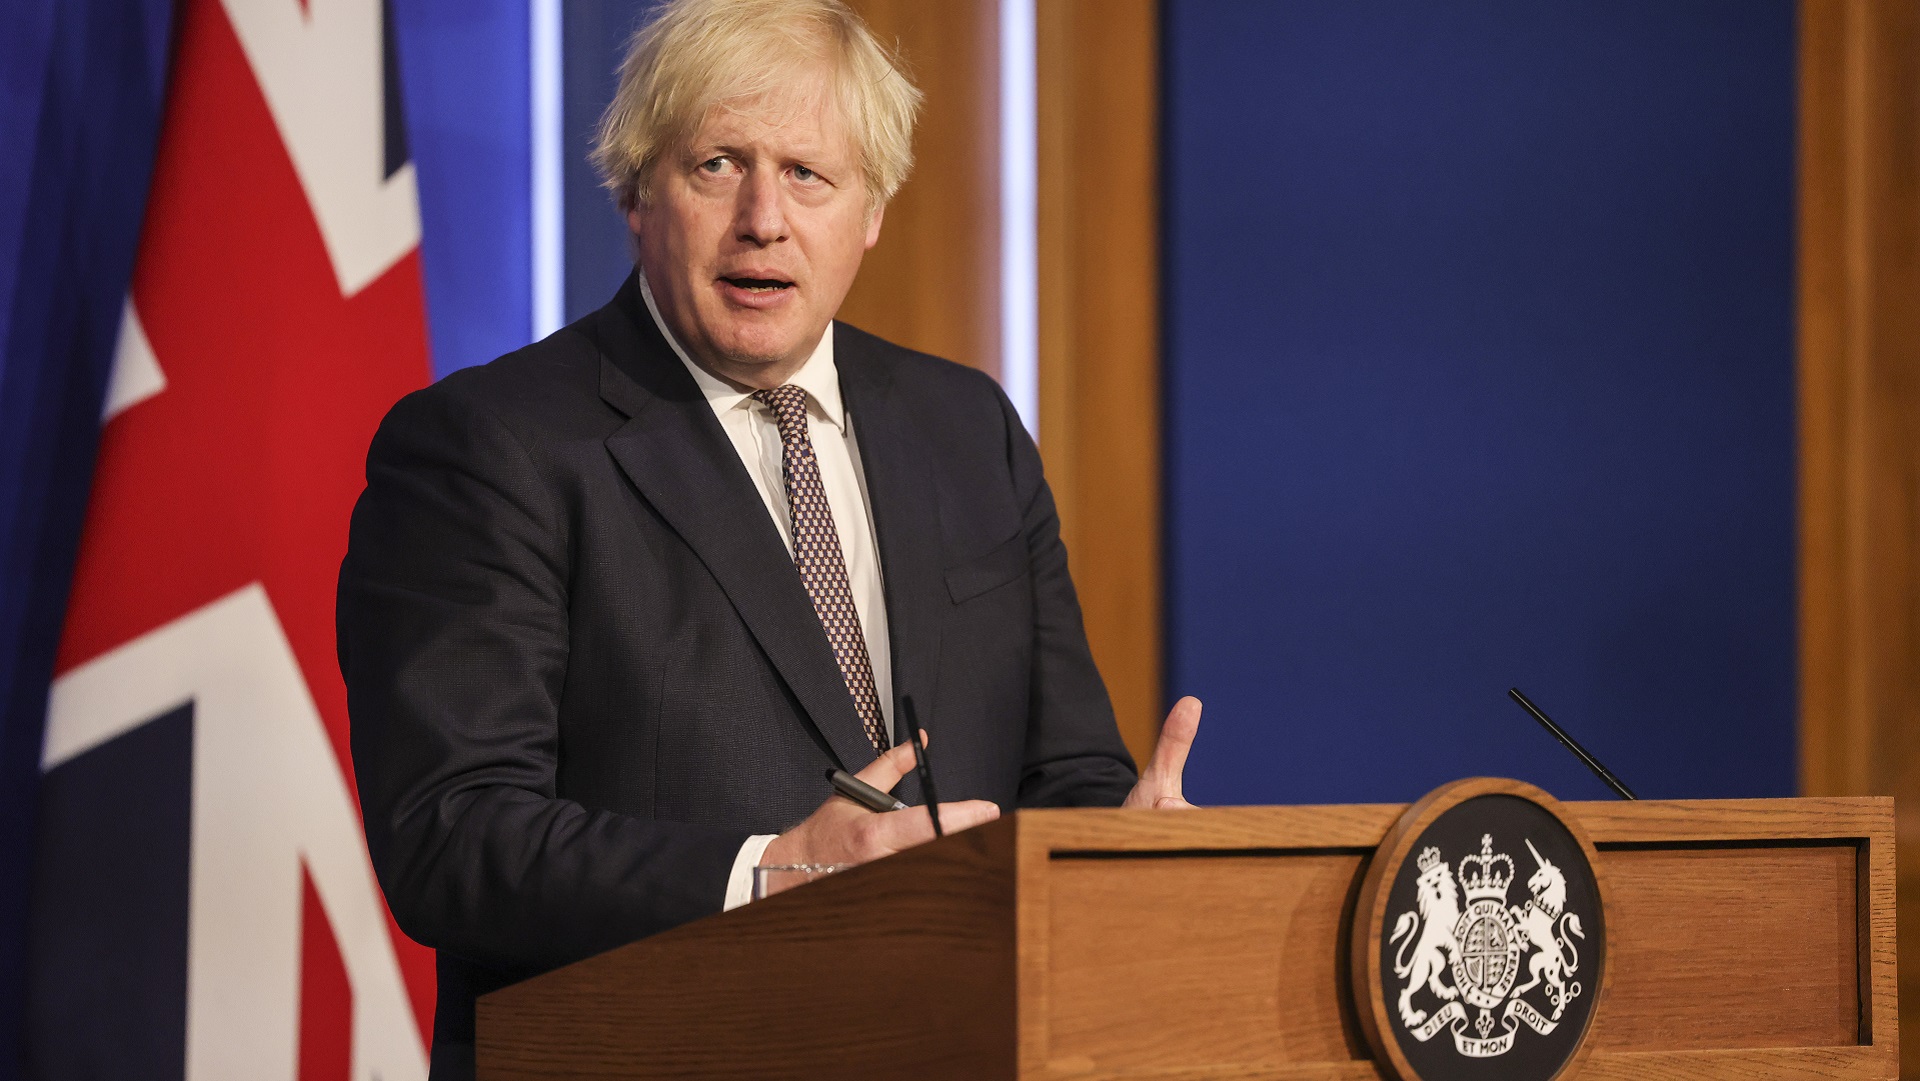 The Prime Minister Boris Johnson holds a press conference in No 9 Downing Street with Chief Scientific Adviser, Sir Patrick Vallance and Chief Medical Officer, Professor Chris Whitty on the ease of Covid-19 restrictions on July 19th 2021.